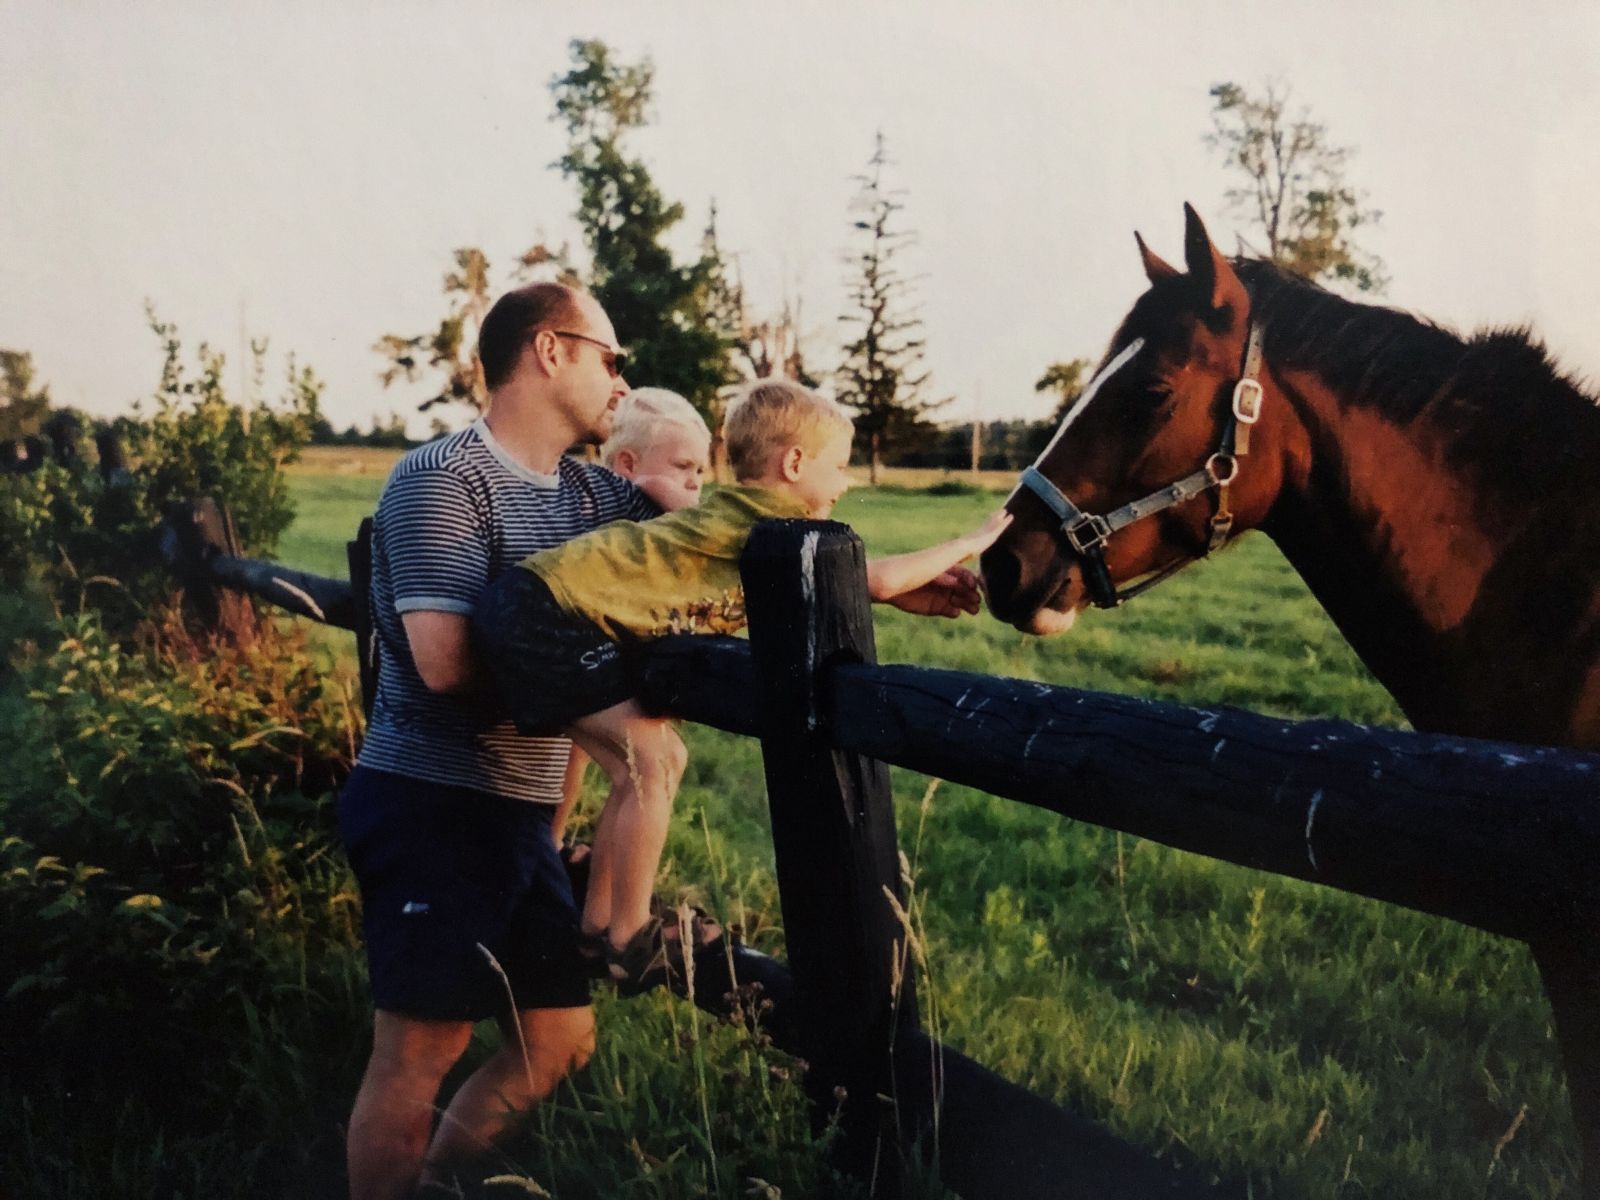 Future student veterinarian Salomon with his father and brother petting a horse